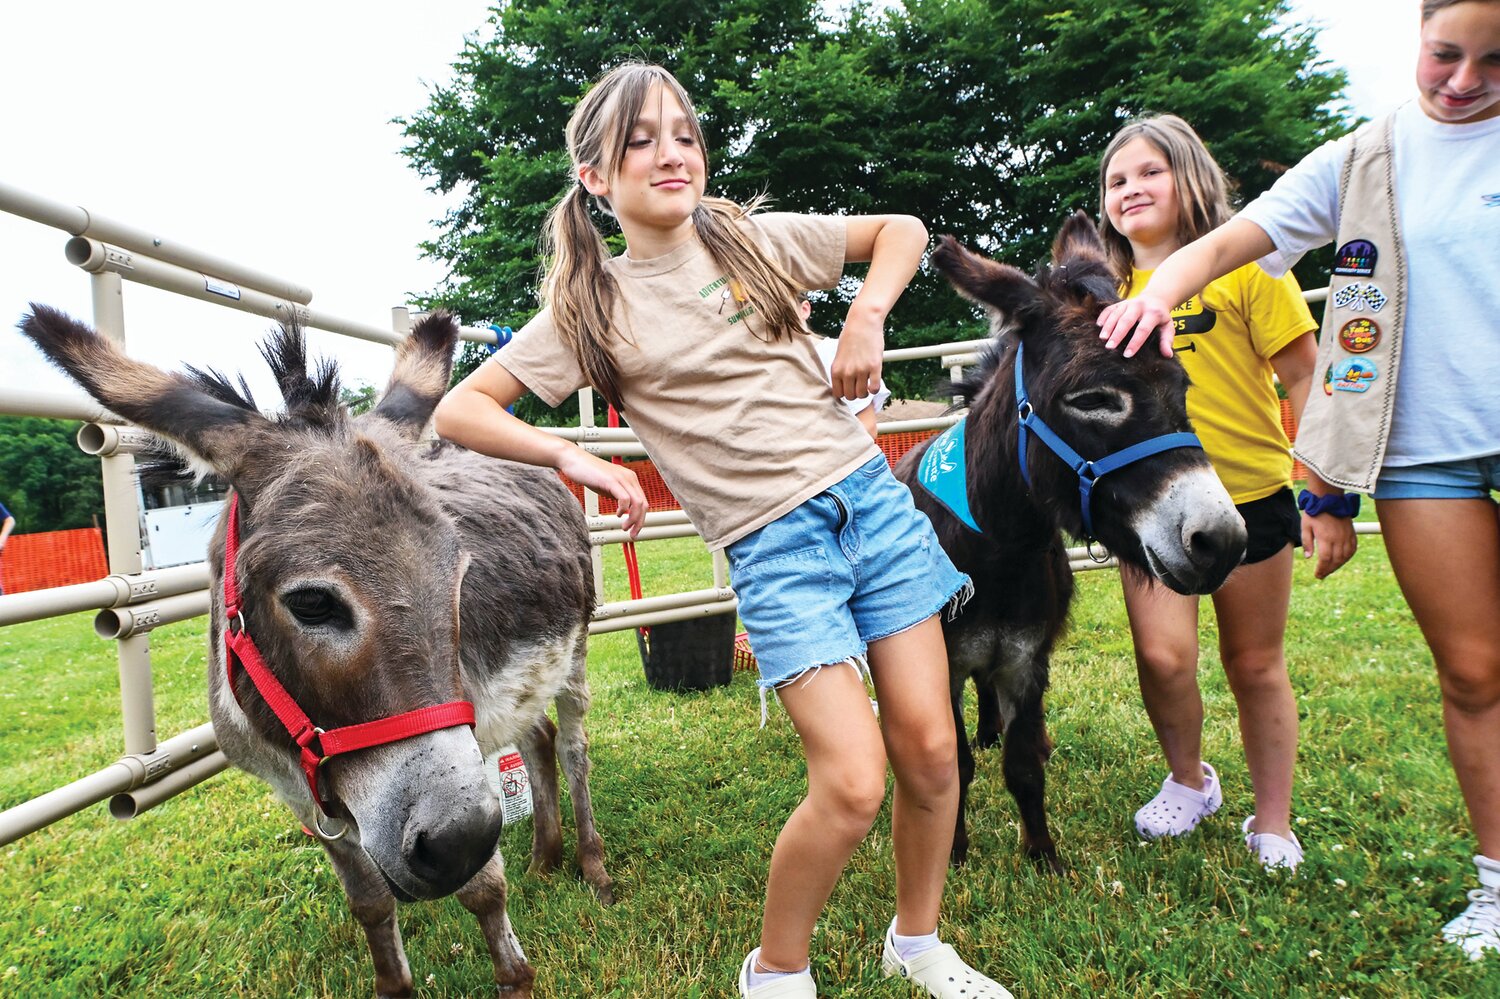 Heidi Cambura pets Greta, a rescue donkey from The Farmette, a Pipersville nonprofit that provides food, shelter and care for donkeys and horses who were mistreated, unwanted or slaughter-bound.